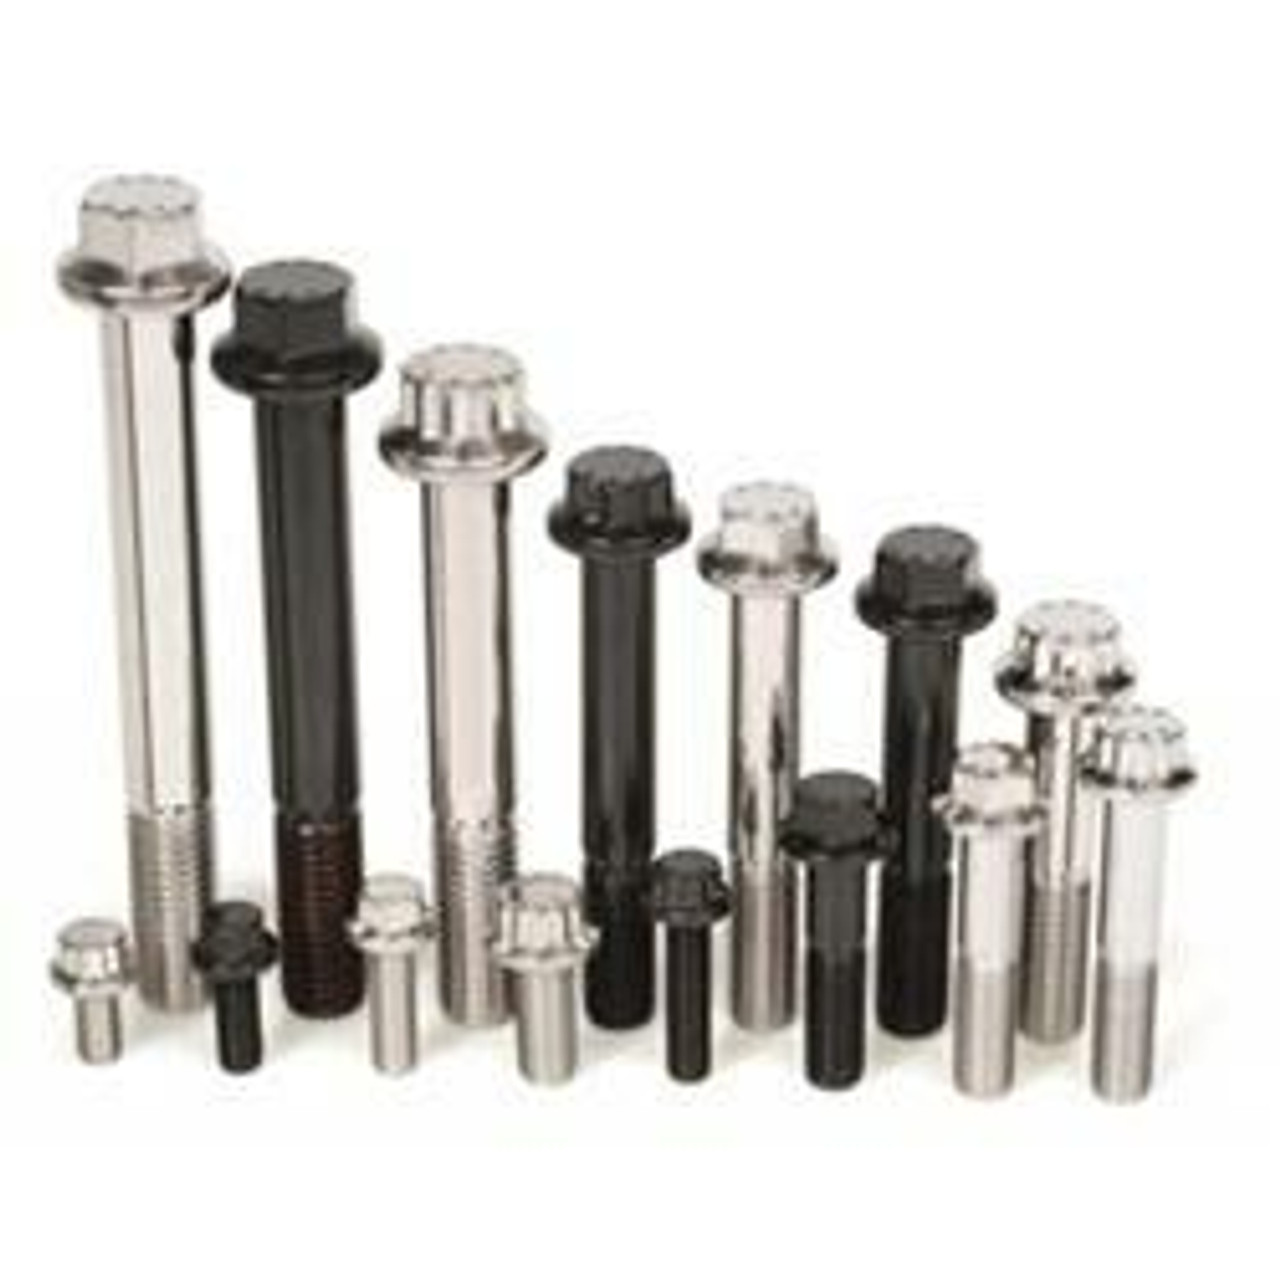 Fasteners, Hardware and Mounts